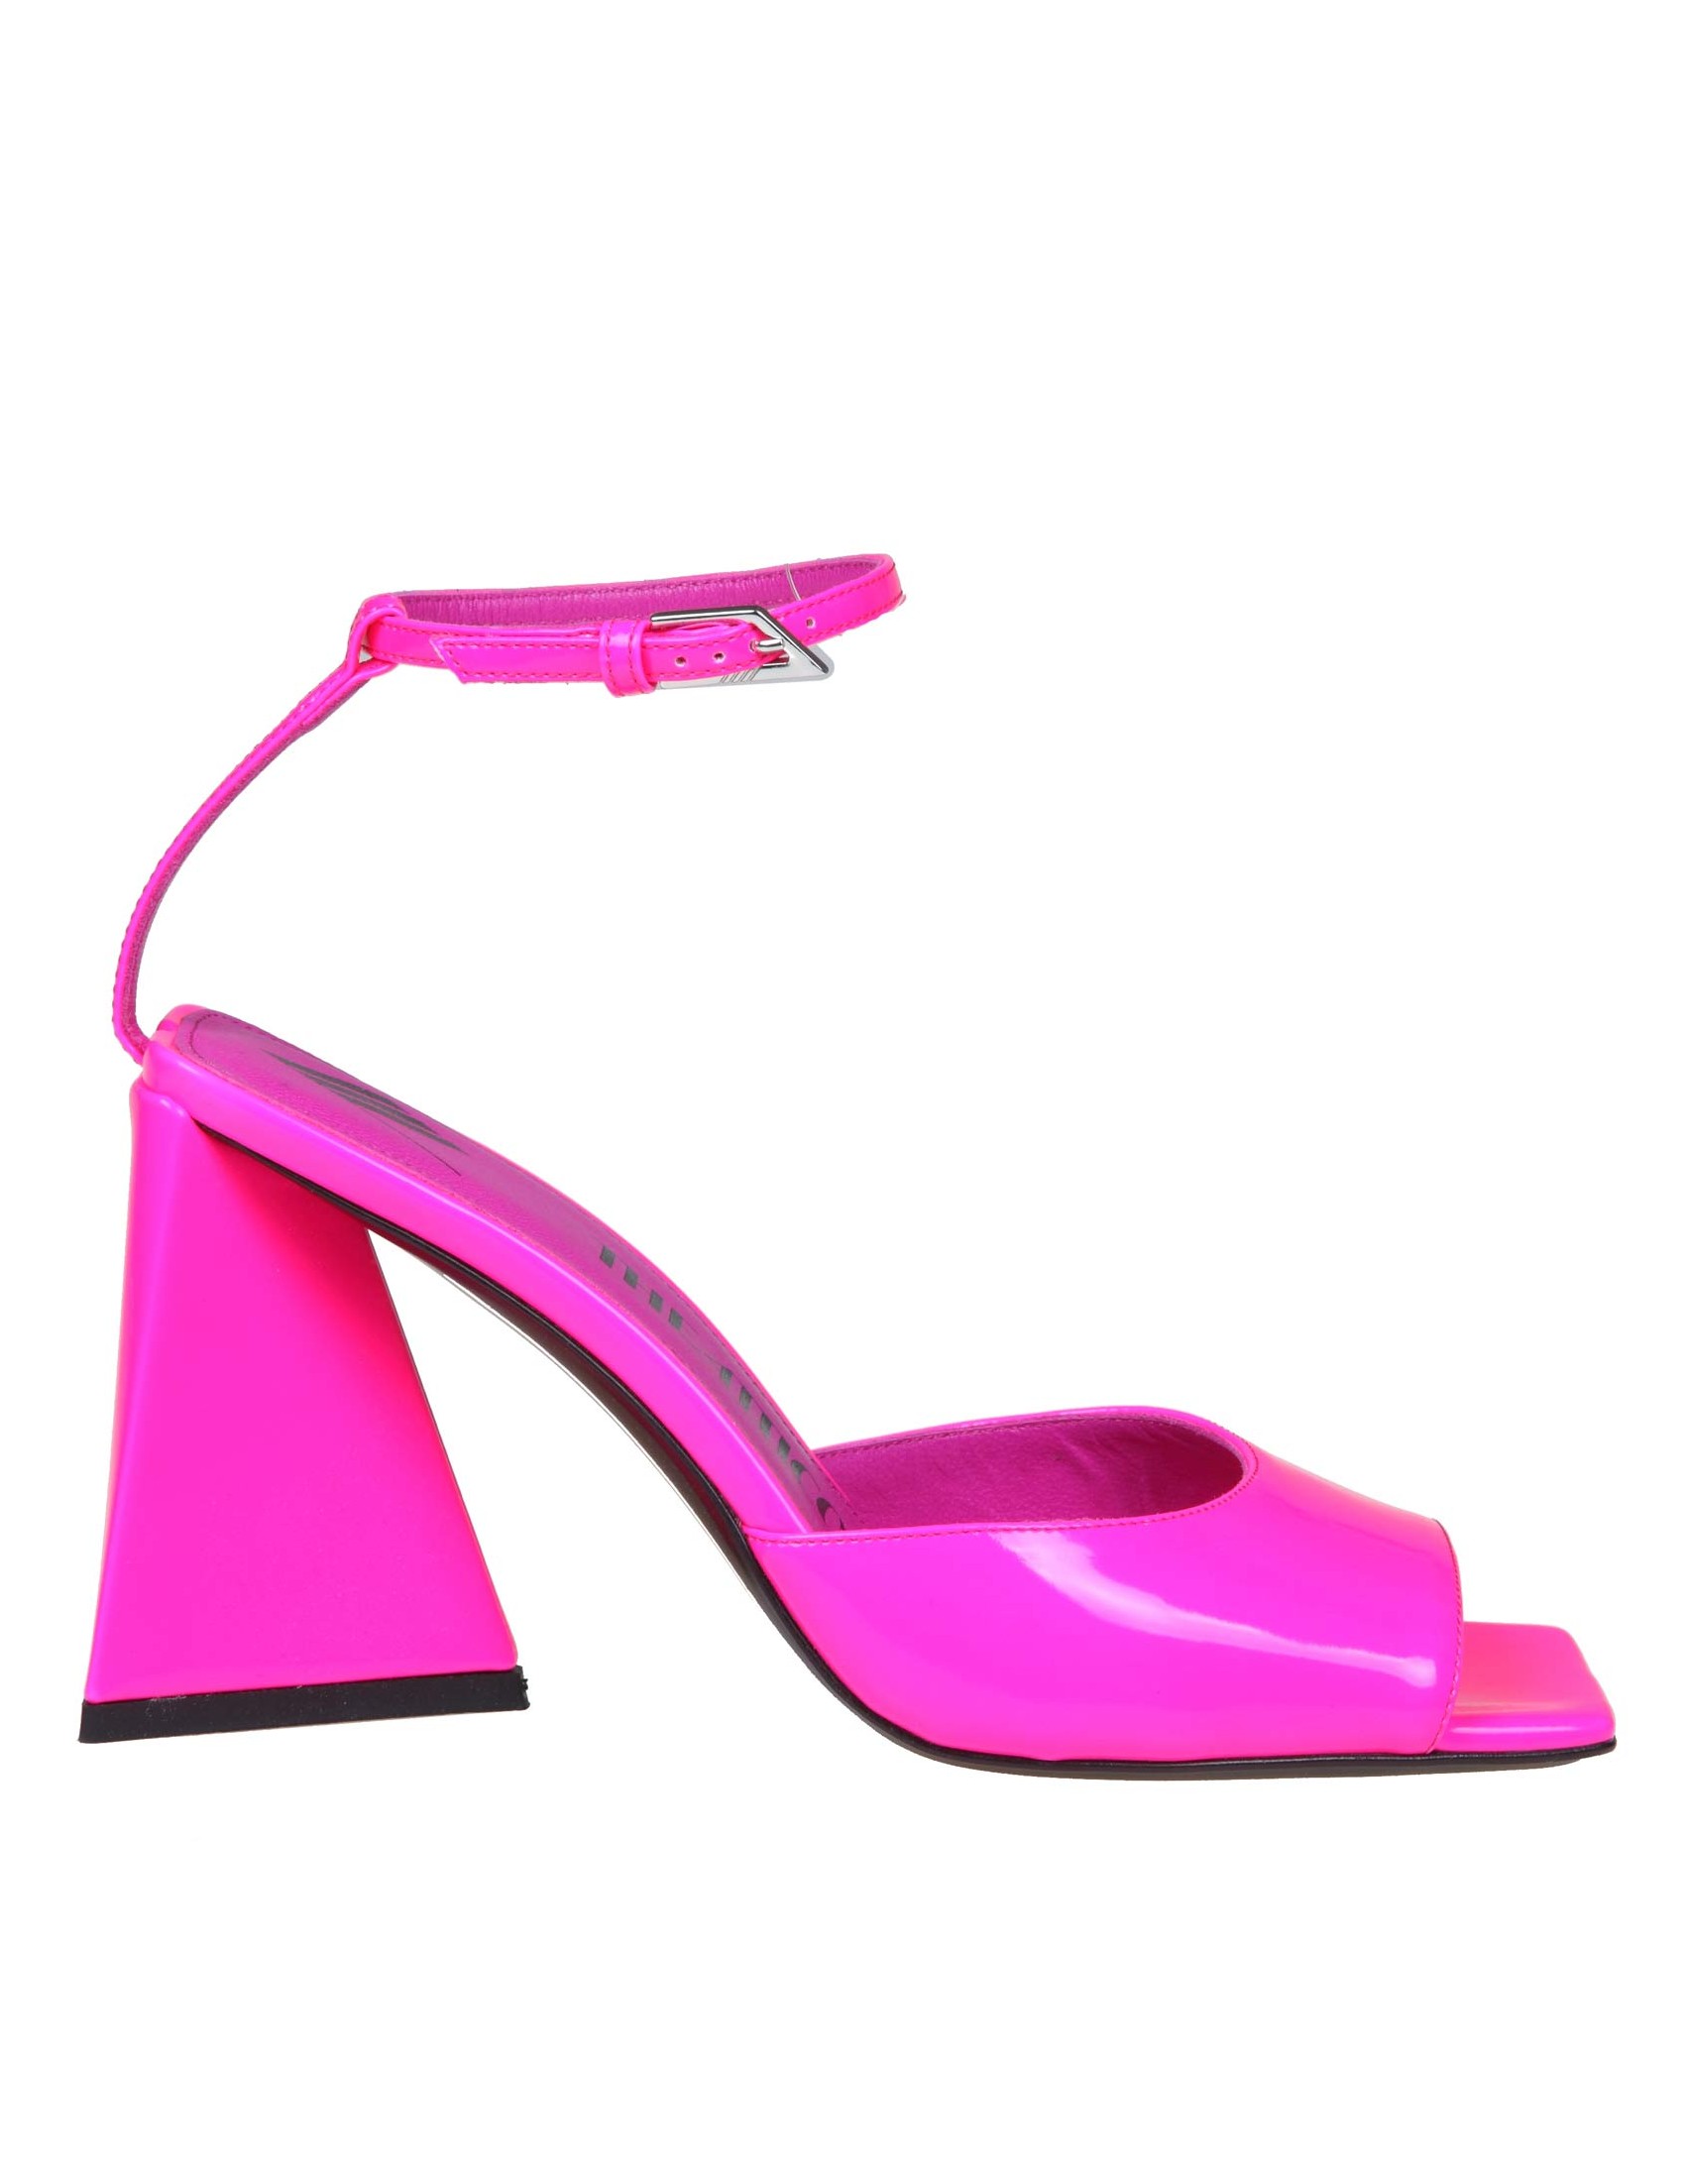 THE ATTICO PIPER SANDAL IN FLUO PINK PAINT